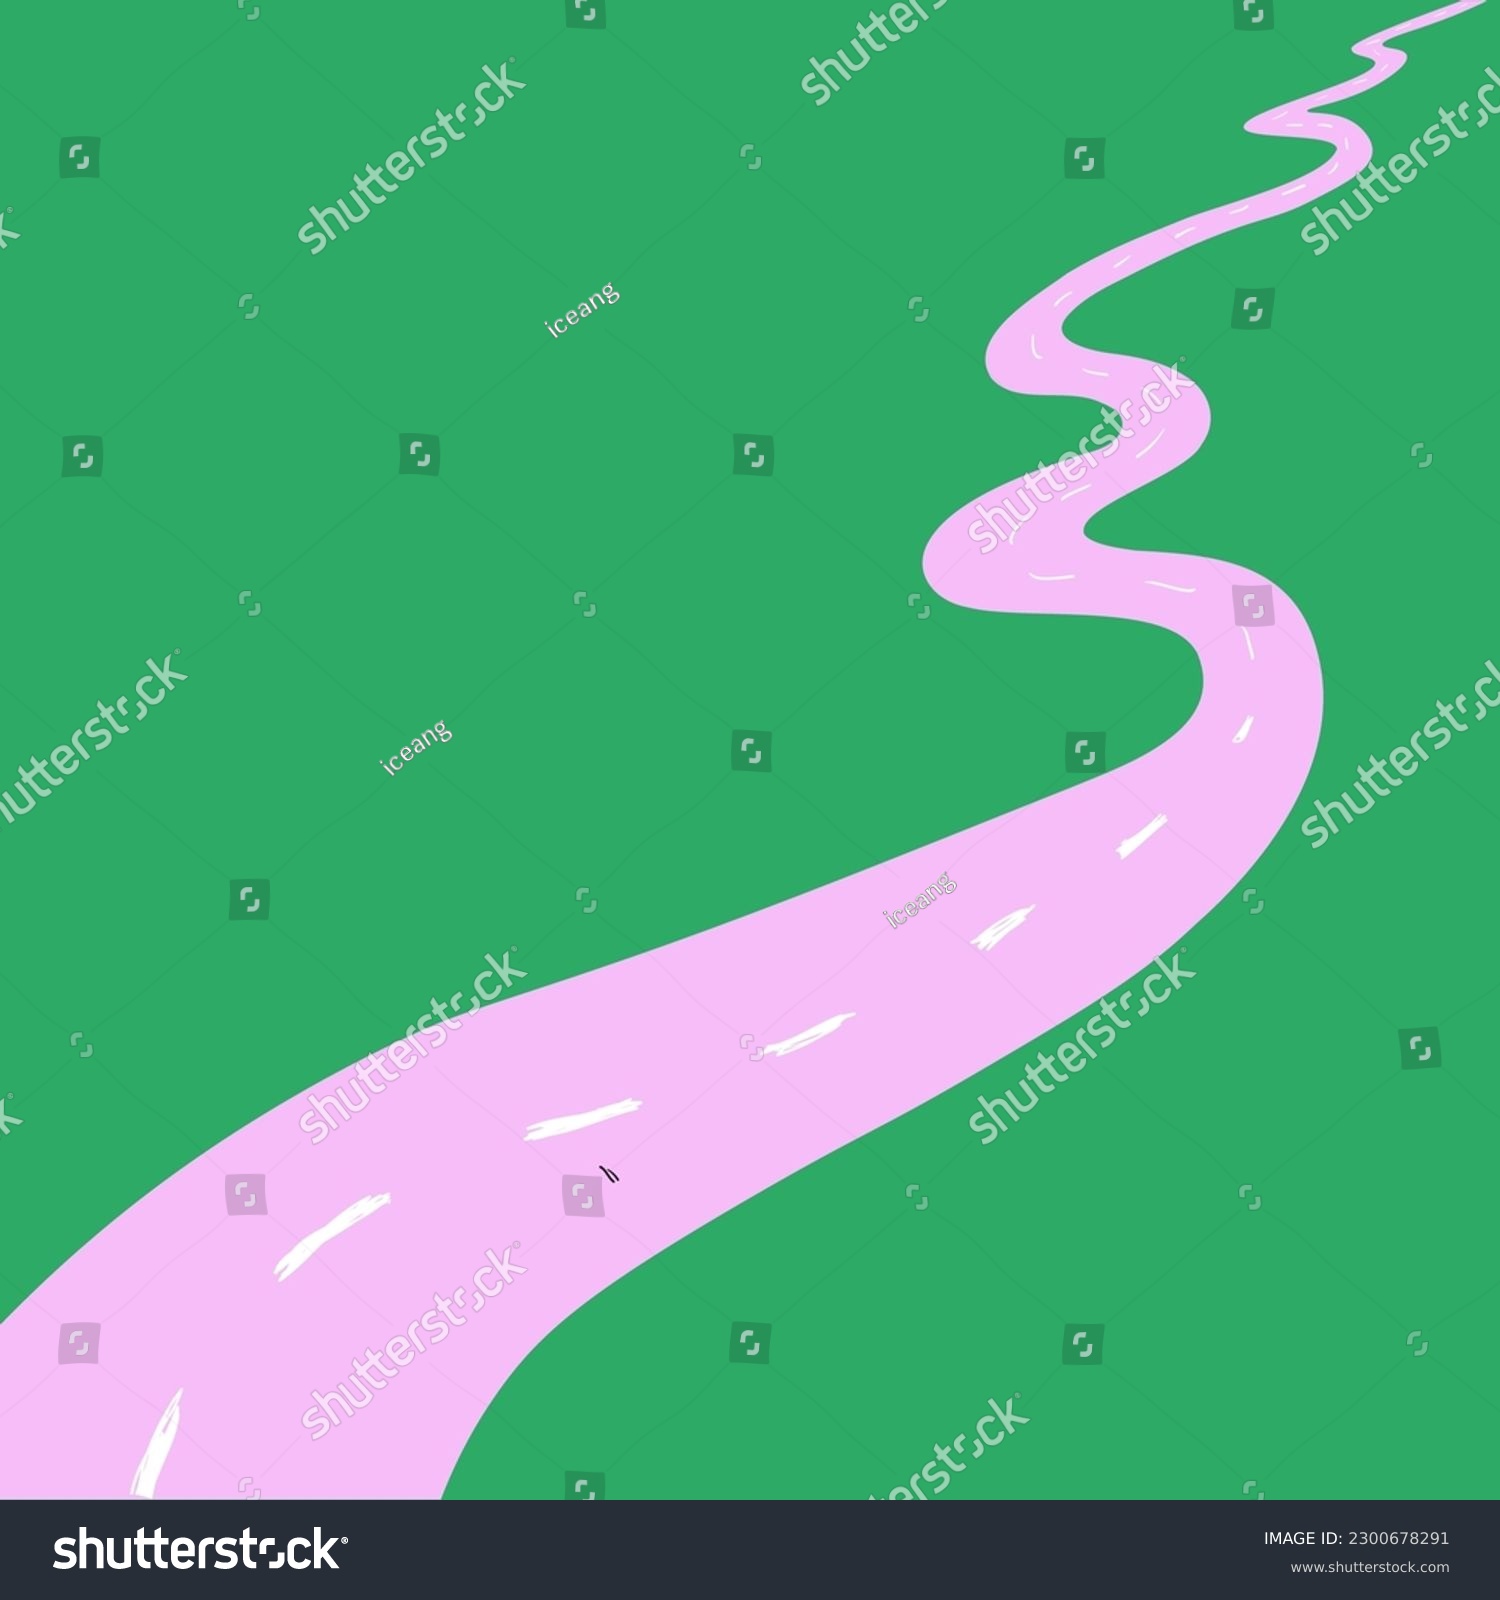 SVG of long asphalt road with markings in vector.winding road in perspective in flat style for design.fairytale path, illustration element.highway to nowhere.mysterious path. svg